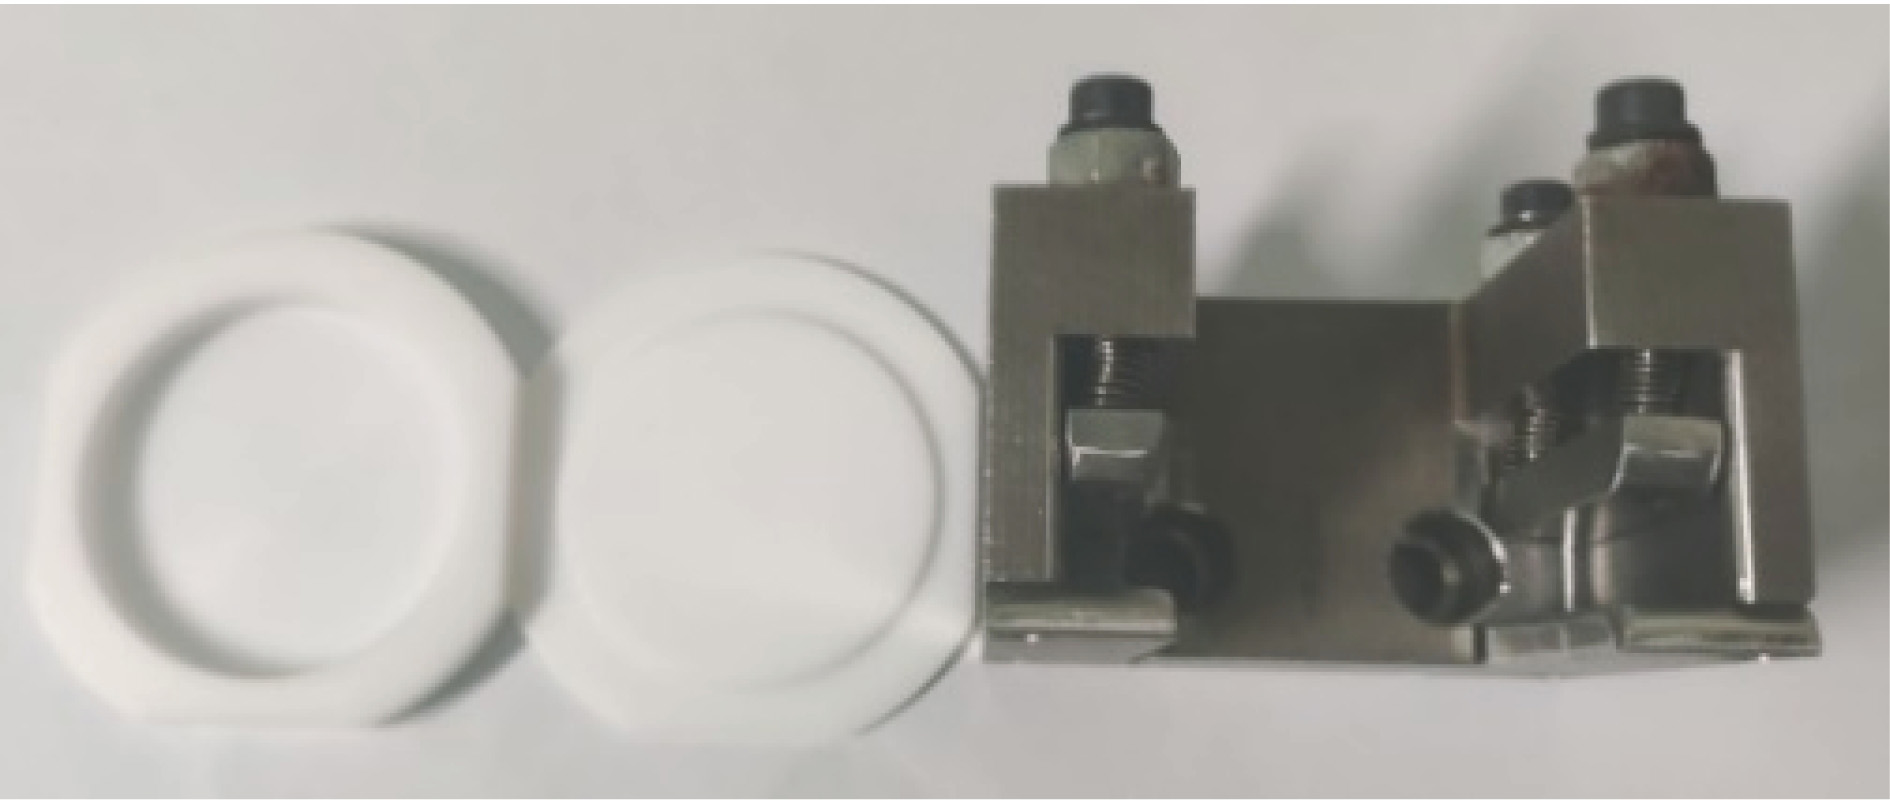 PTFE sample cell and its stainless steel fixture